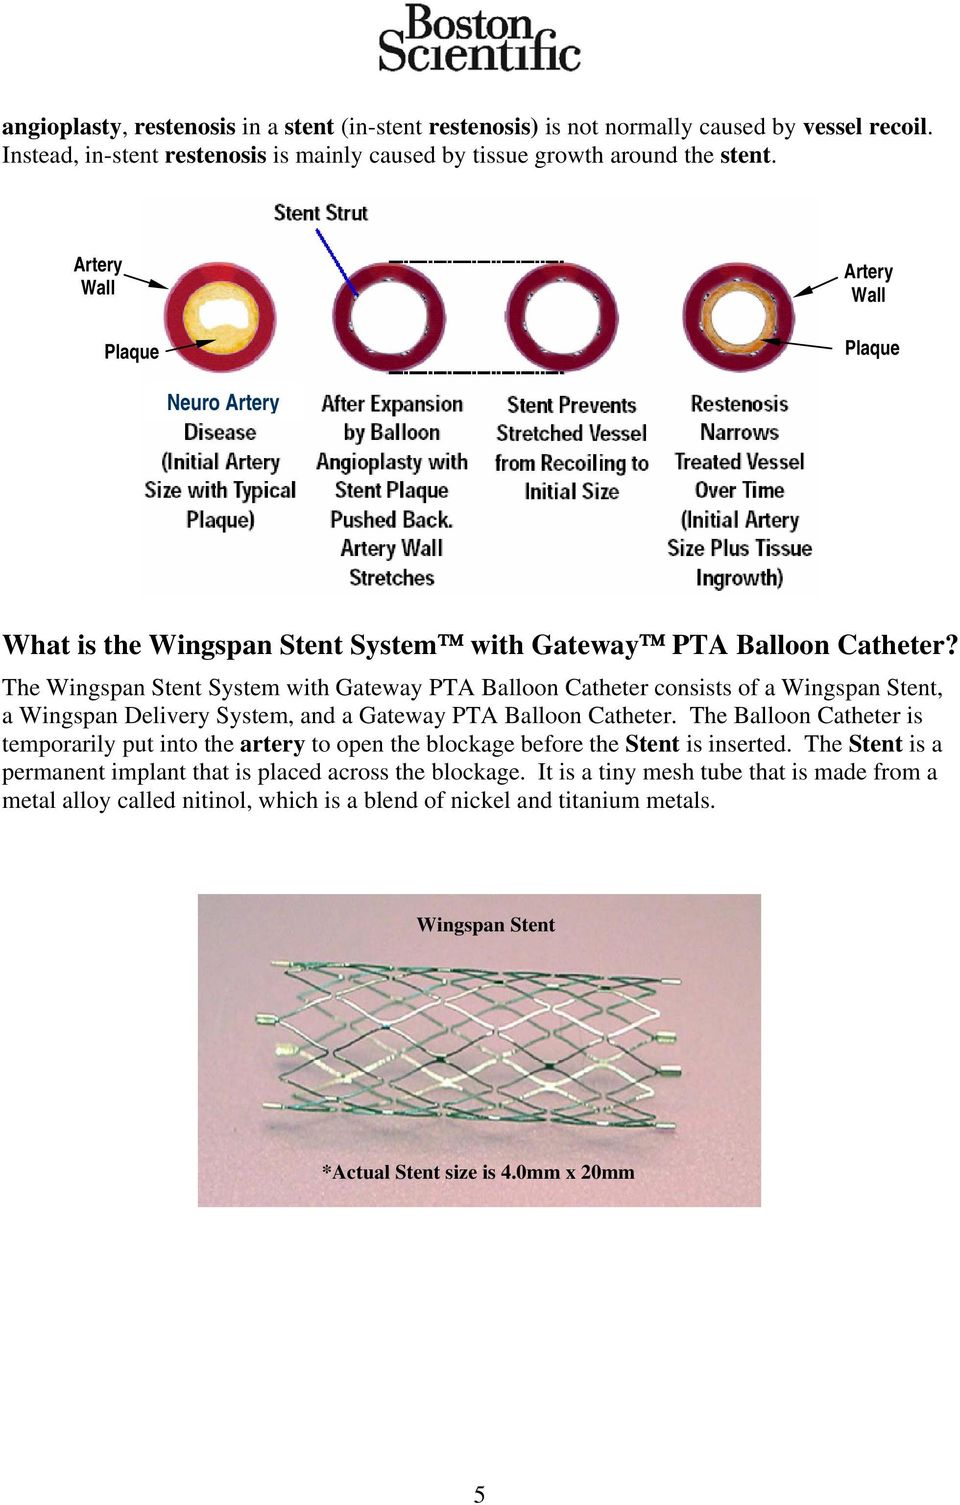 The Wingspan Stent System with Gateway PTA Balloon Catheter consists of a Wingspan Stent, a Wingspan Delivery System, and a Gateway PTA Balloon Catheter.